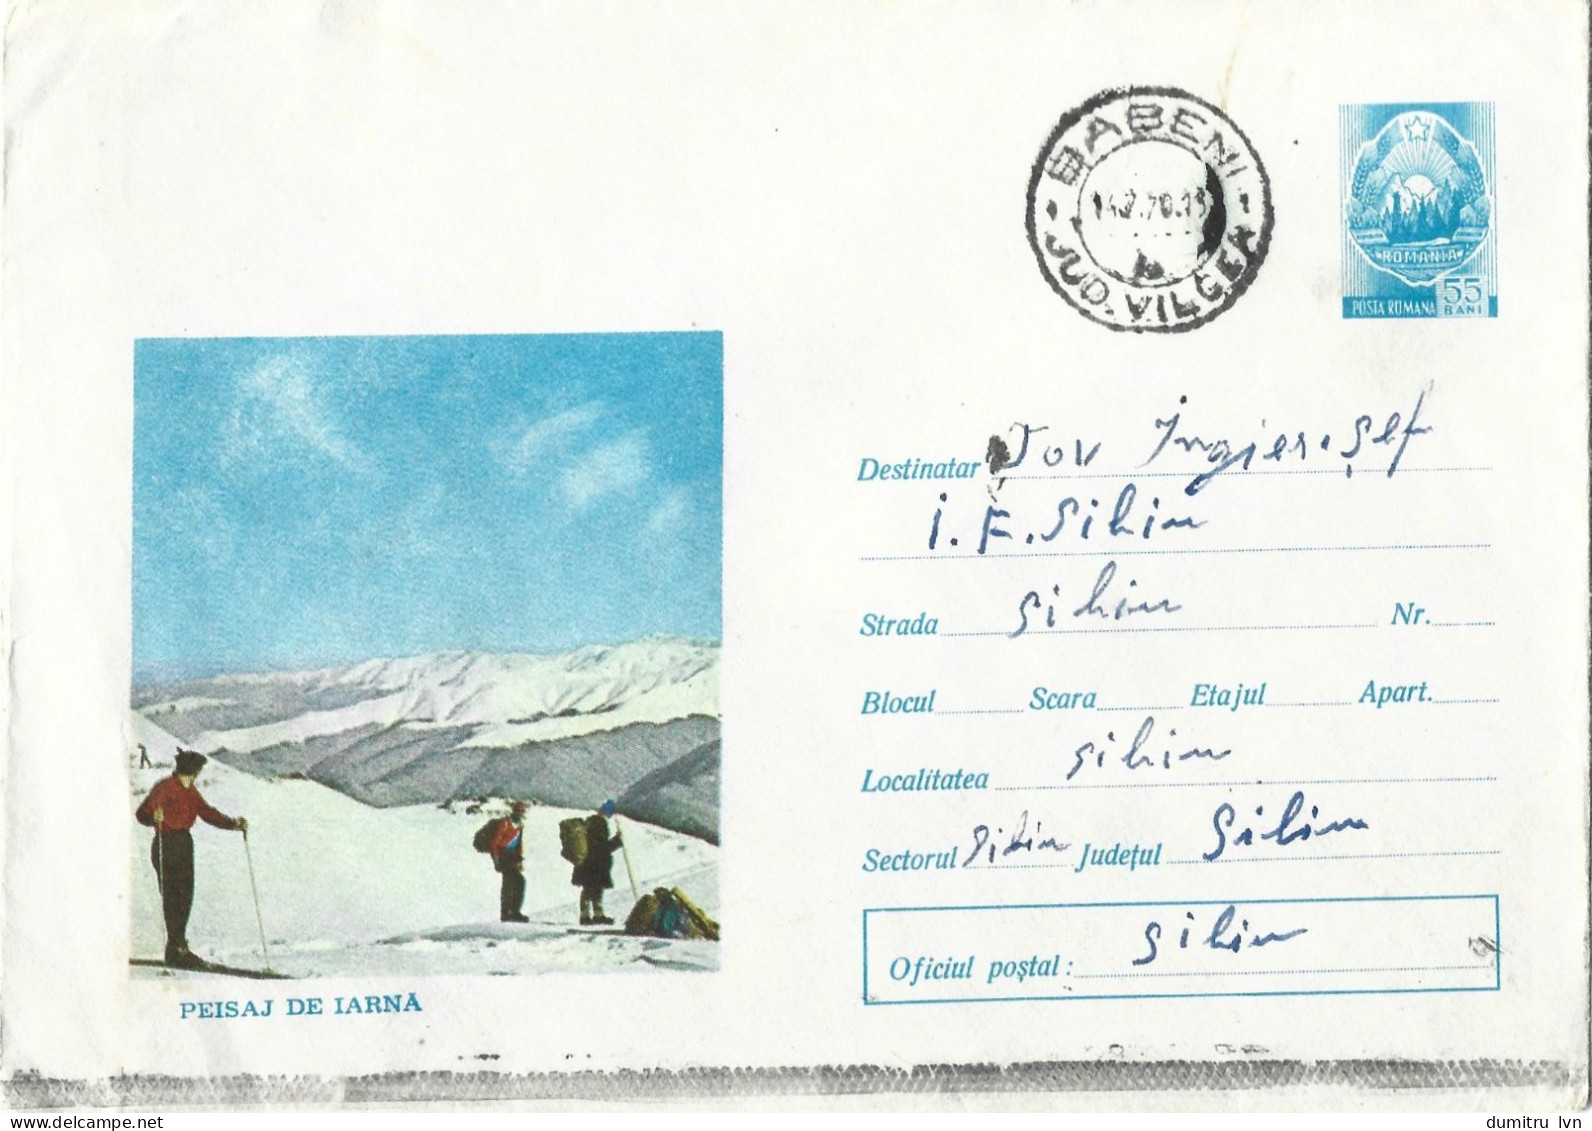 ROMANIA 1969 WINTER LANDSCAPE, SKIERS, CIRCULATED ENVELOPE, COVER STATIONERY - Postal Stationery